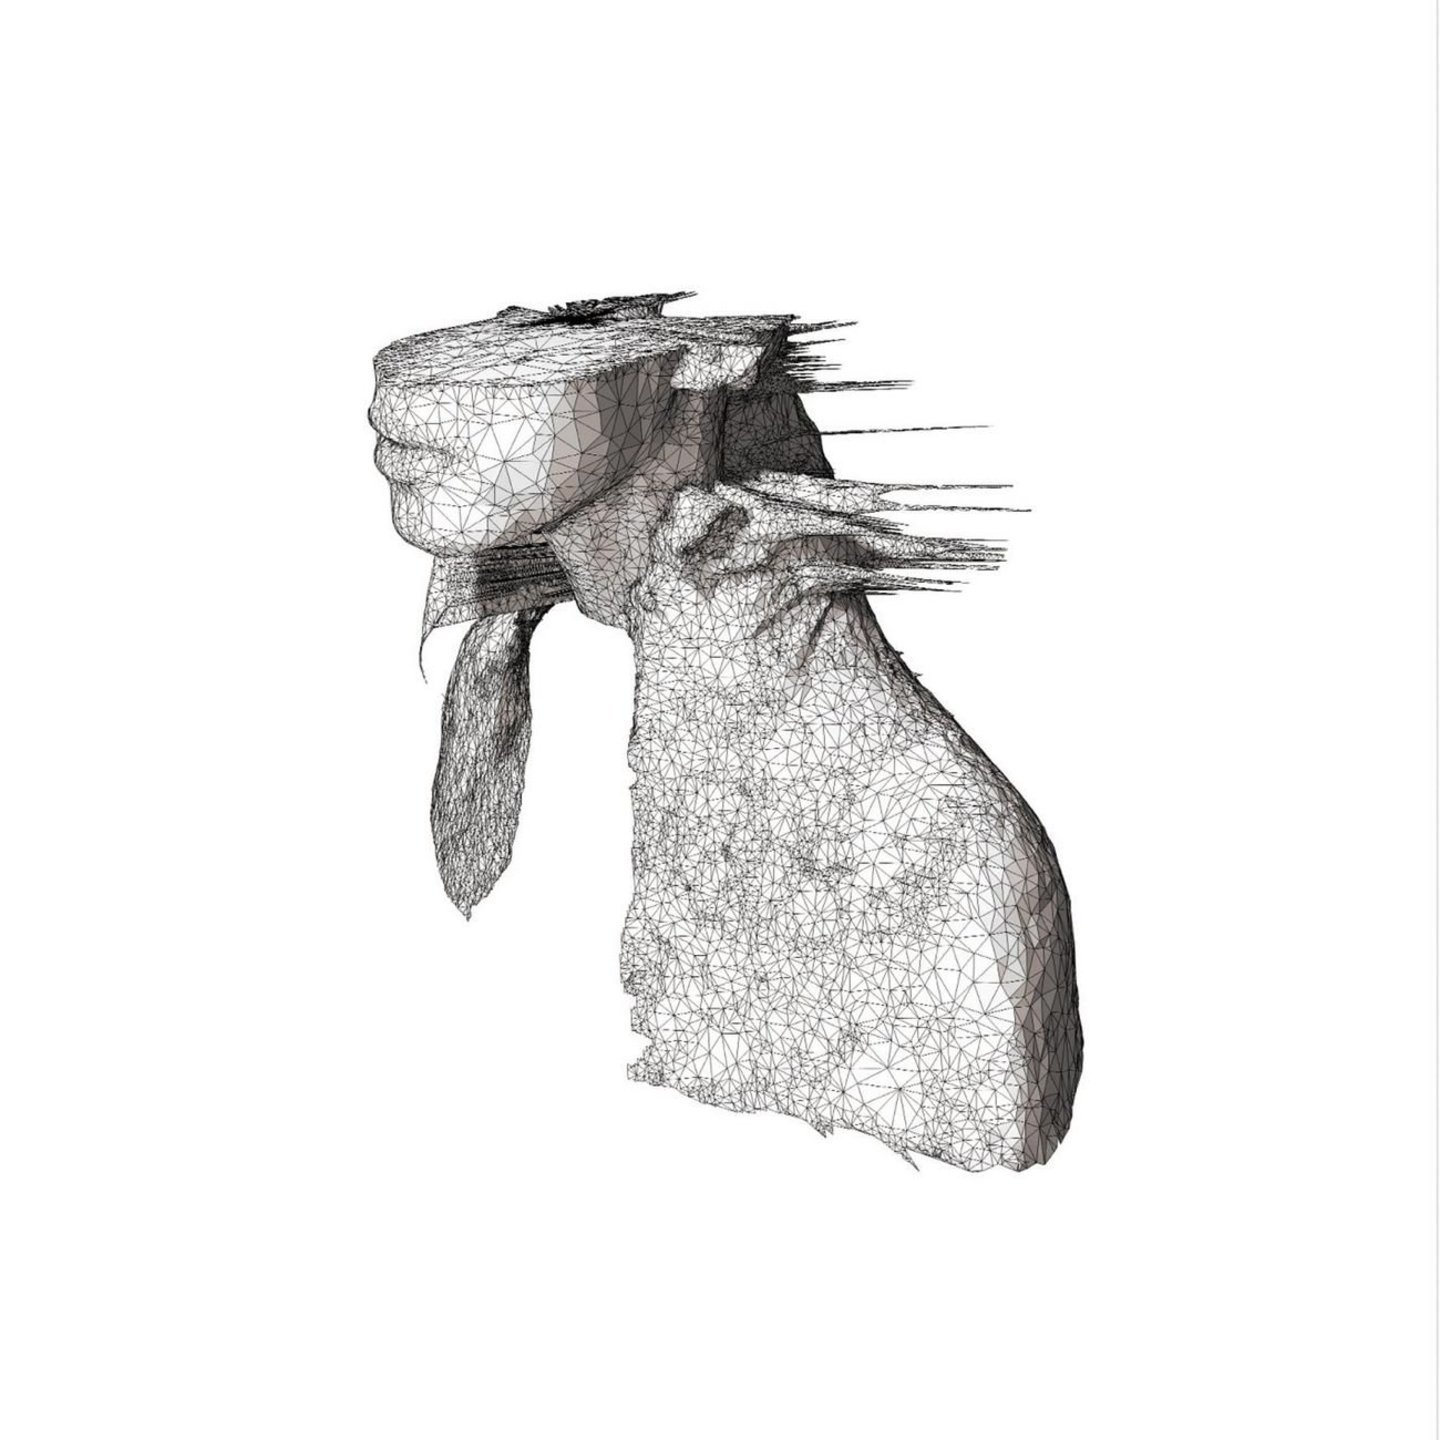 COLDPLAY - A Rush Of Blood To The Head LP 180g